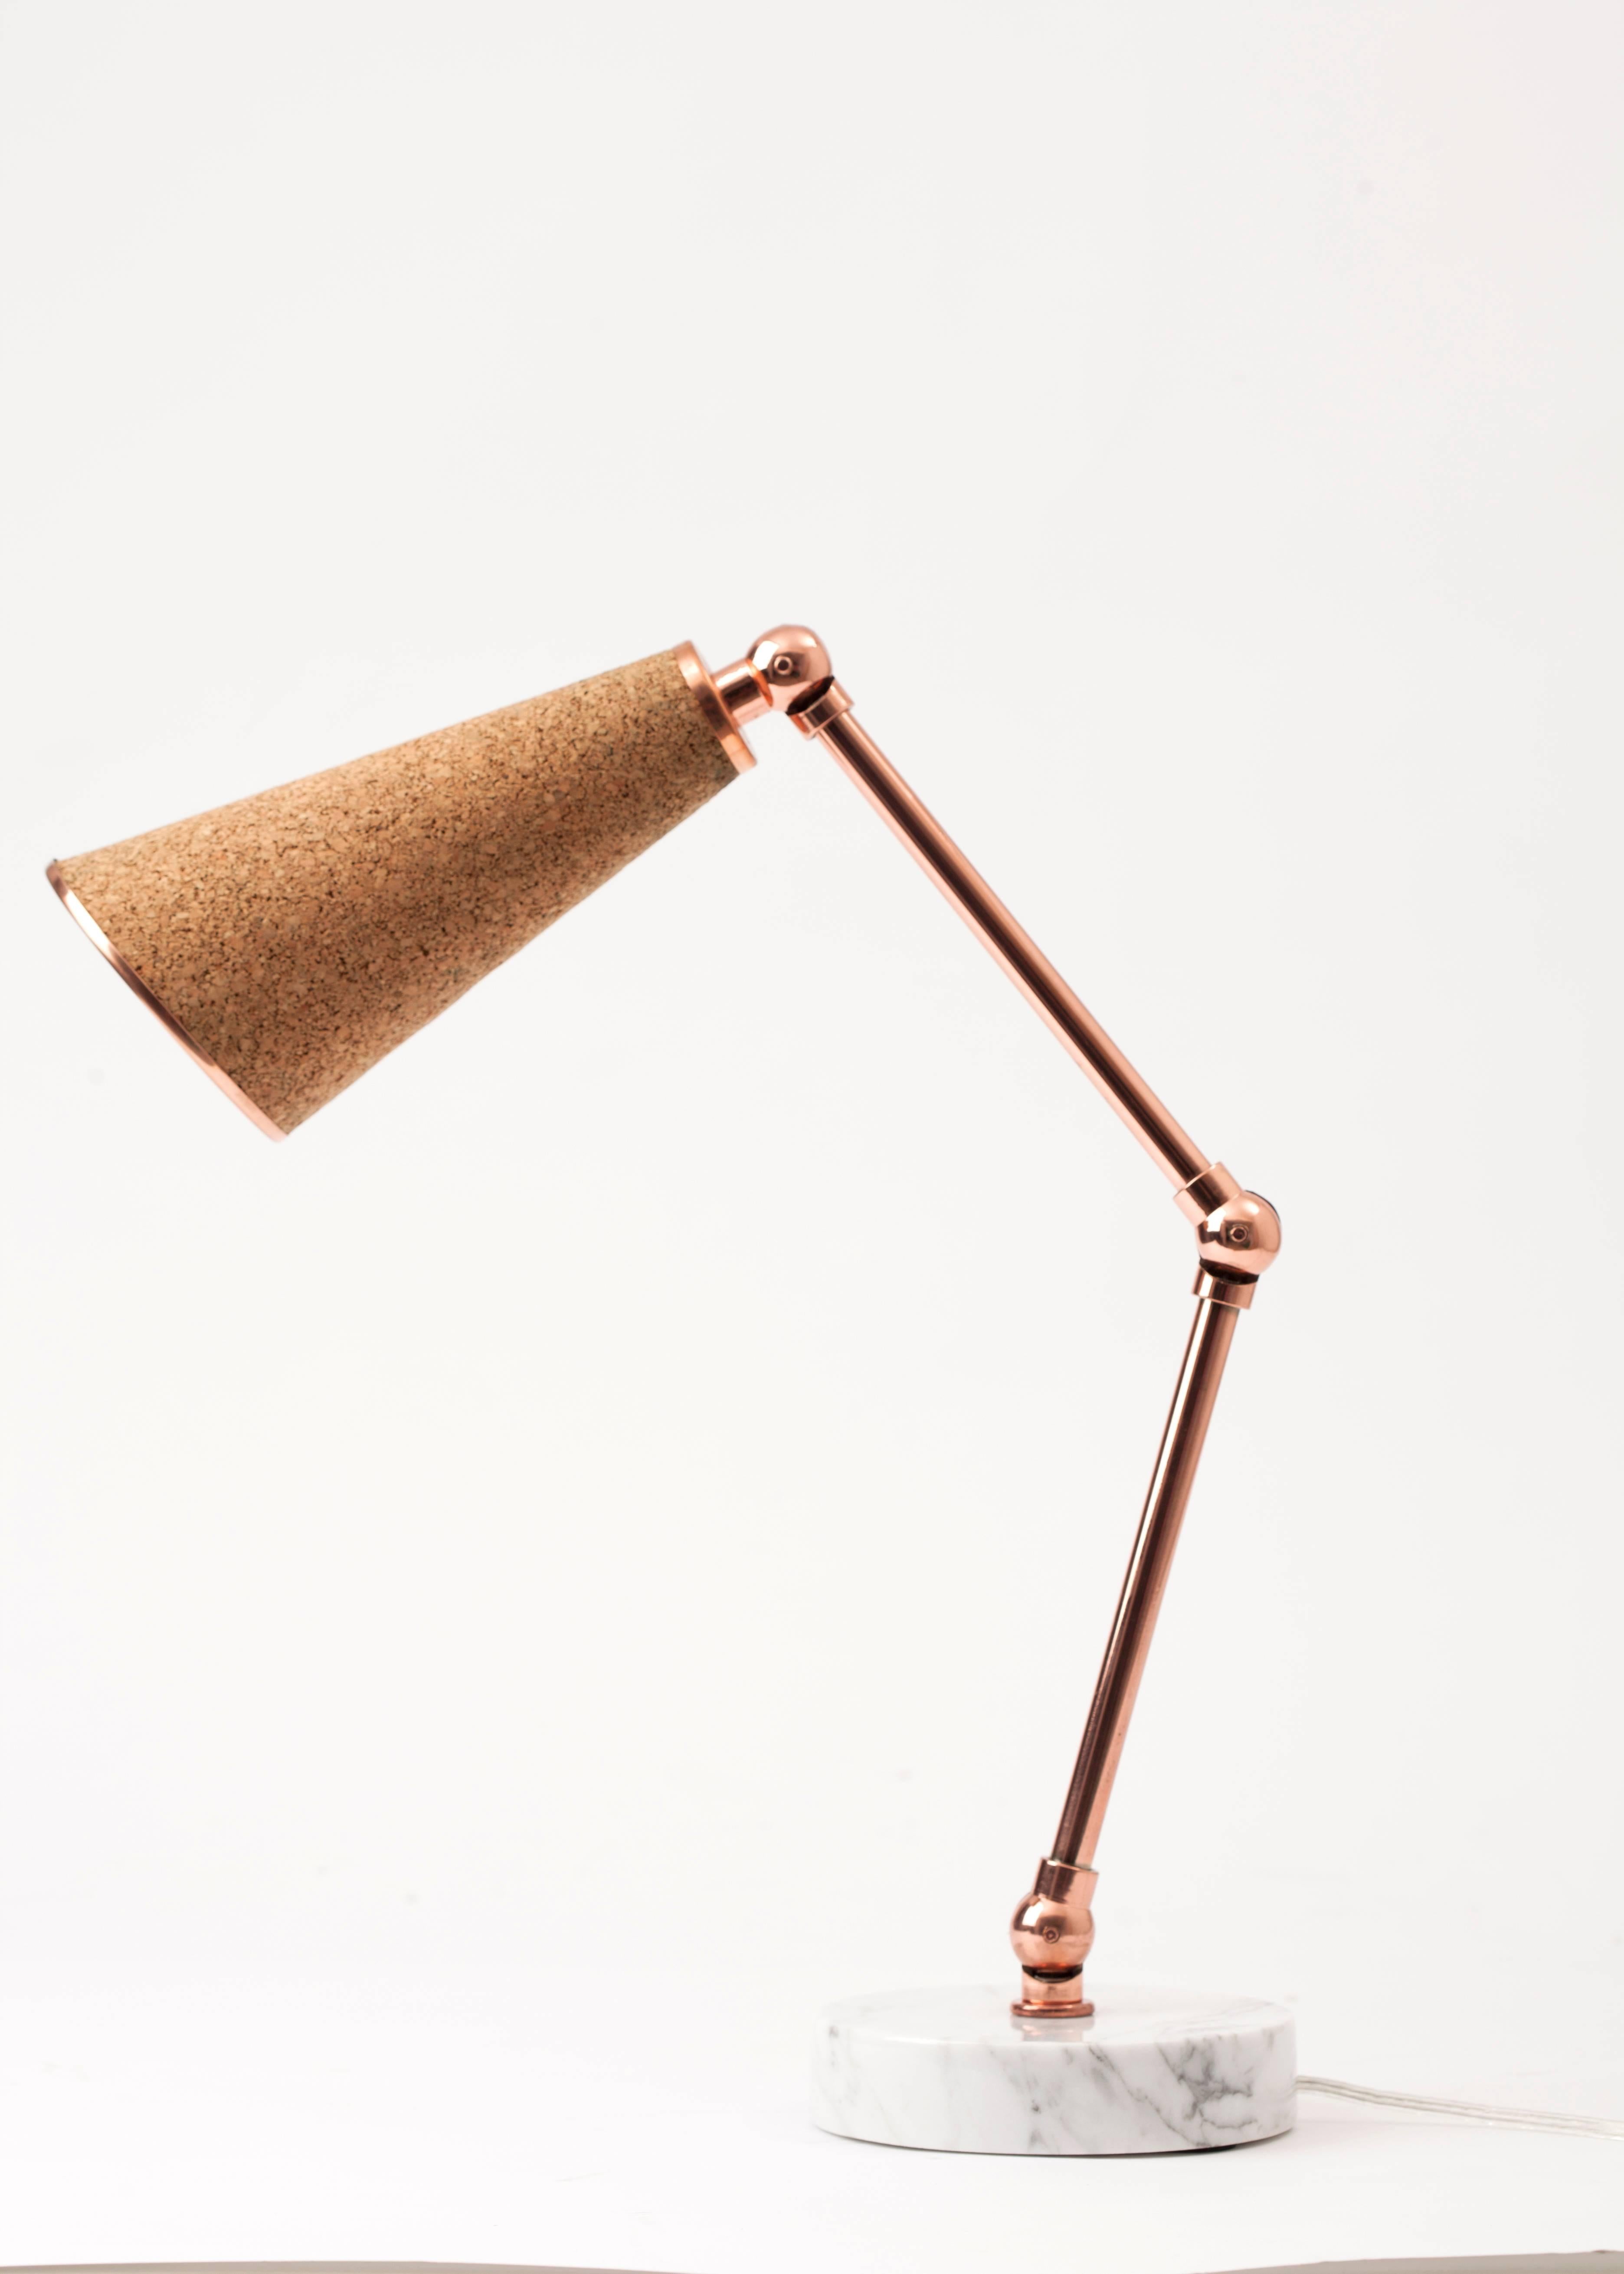 Lanterna Table Lamp in Carrara Marble, Cork and Copper with Adjustable Arms  For Sale 2